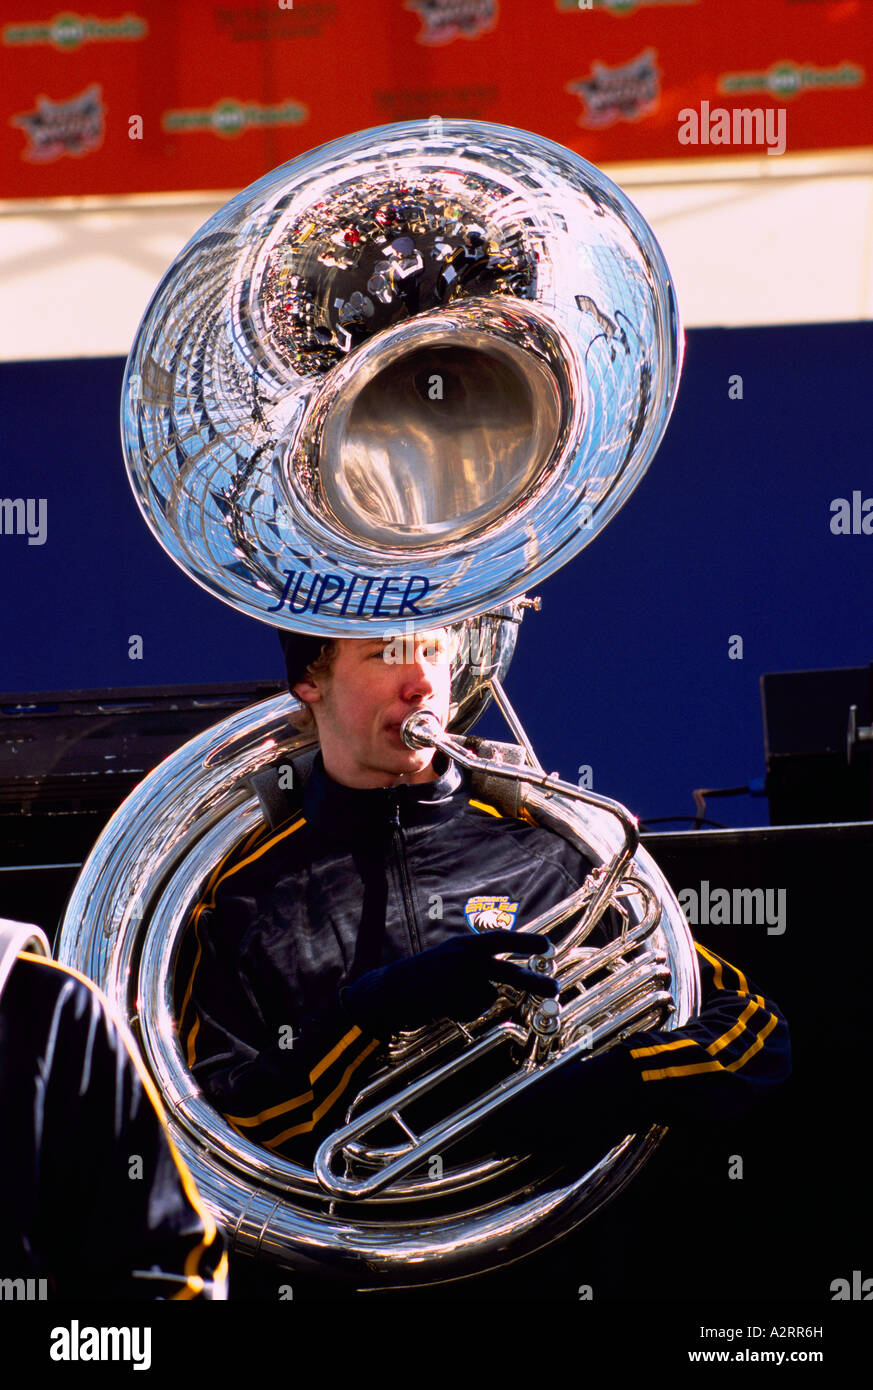 A Young Man playing a Sousaphone or Tuba Stock Photo